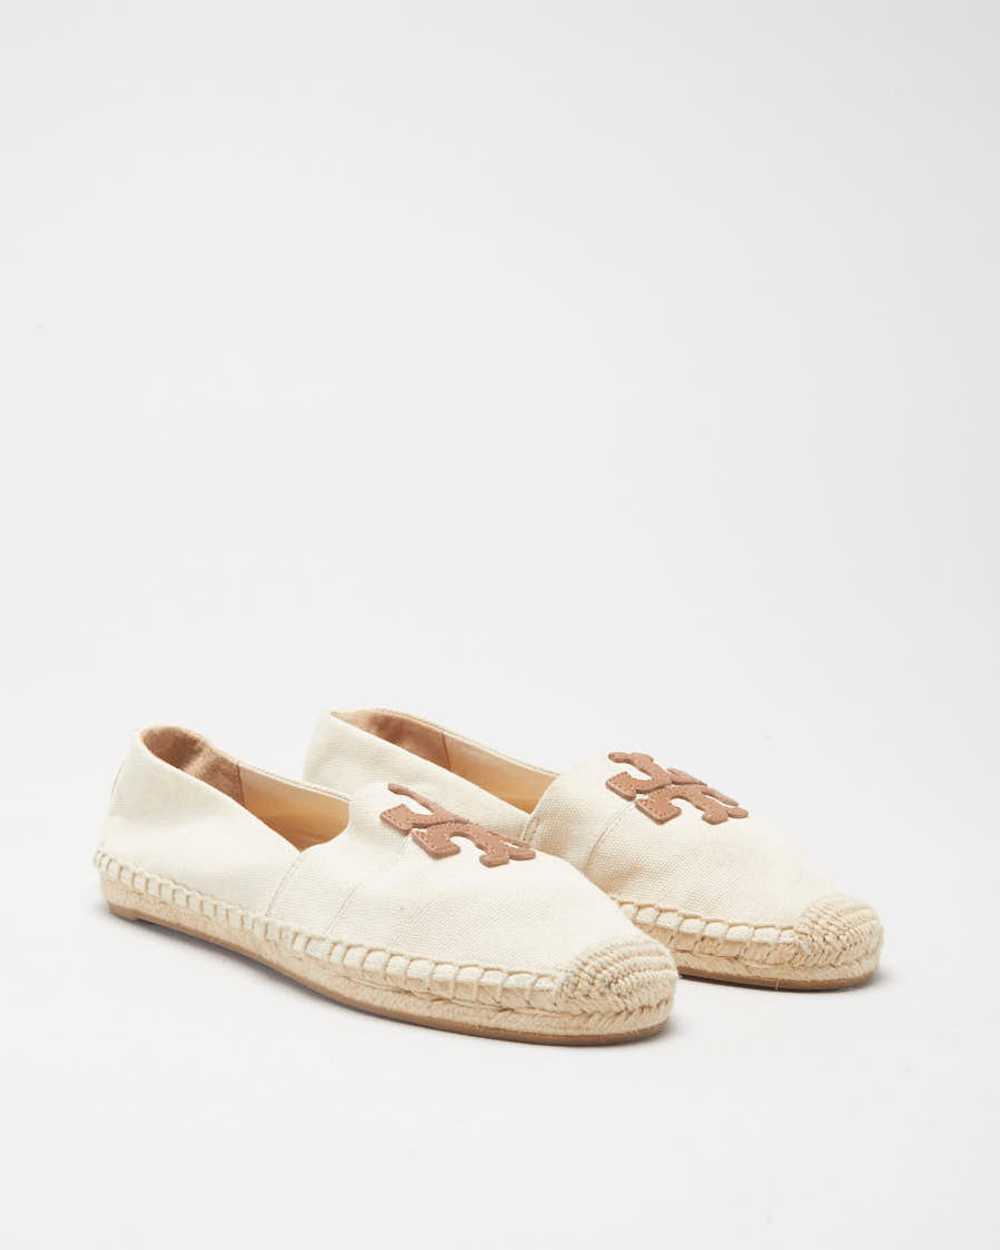 Tory Burch Cream & Brown Canvas Shoes - UK 3.5 - image 1